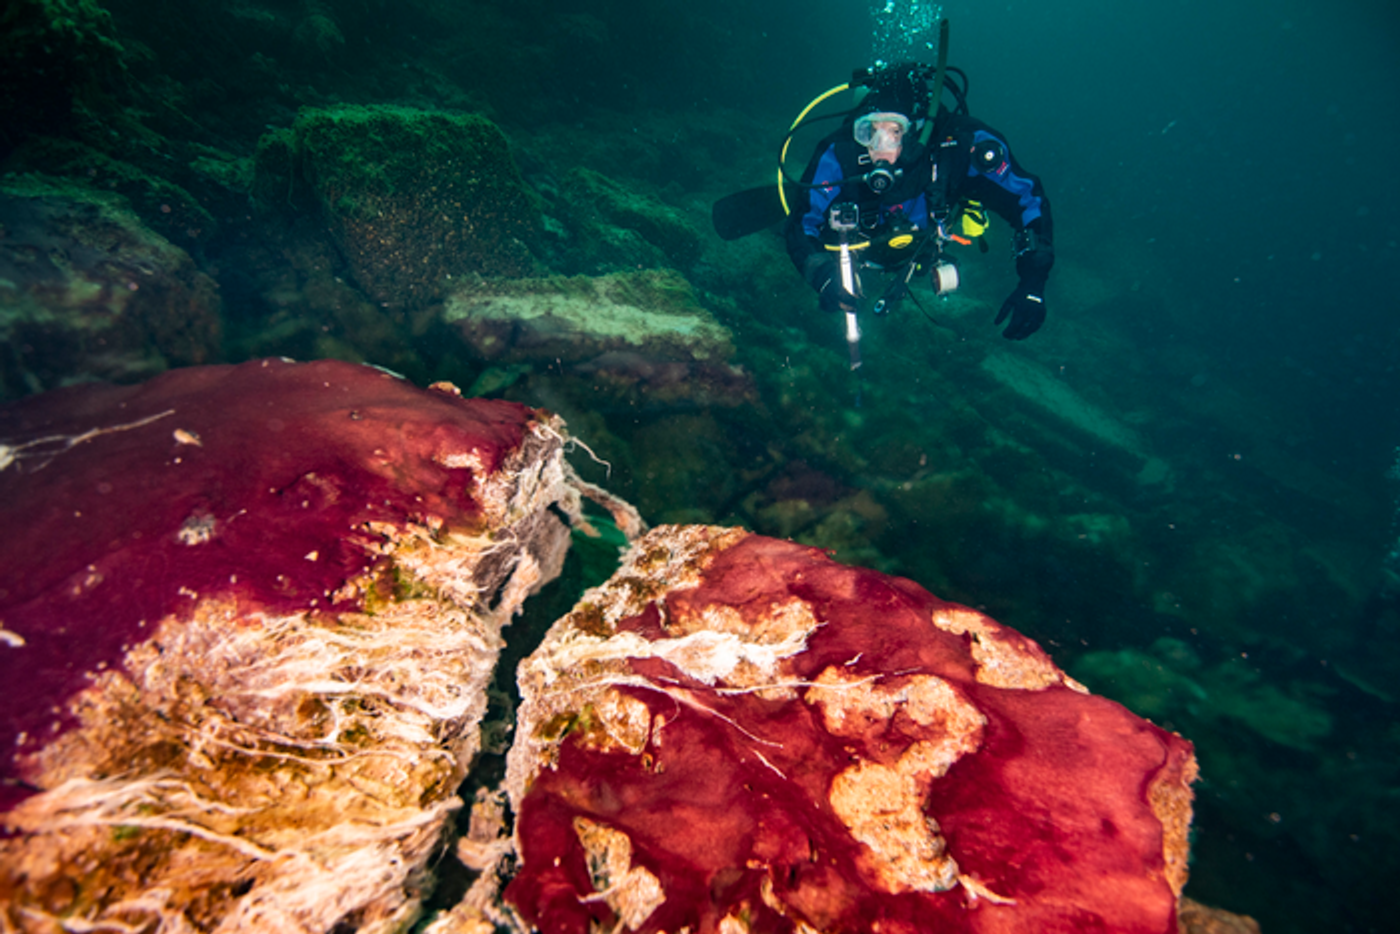 A scuba diver observes the purple, white and green microbes on rocks in Lake Huron's Middle Island Sinkhole. / Credit: Phil Hartmeyer, NOAA Thunder Bay National Marine Sanctuary